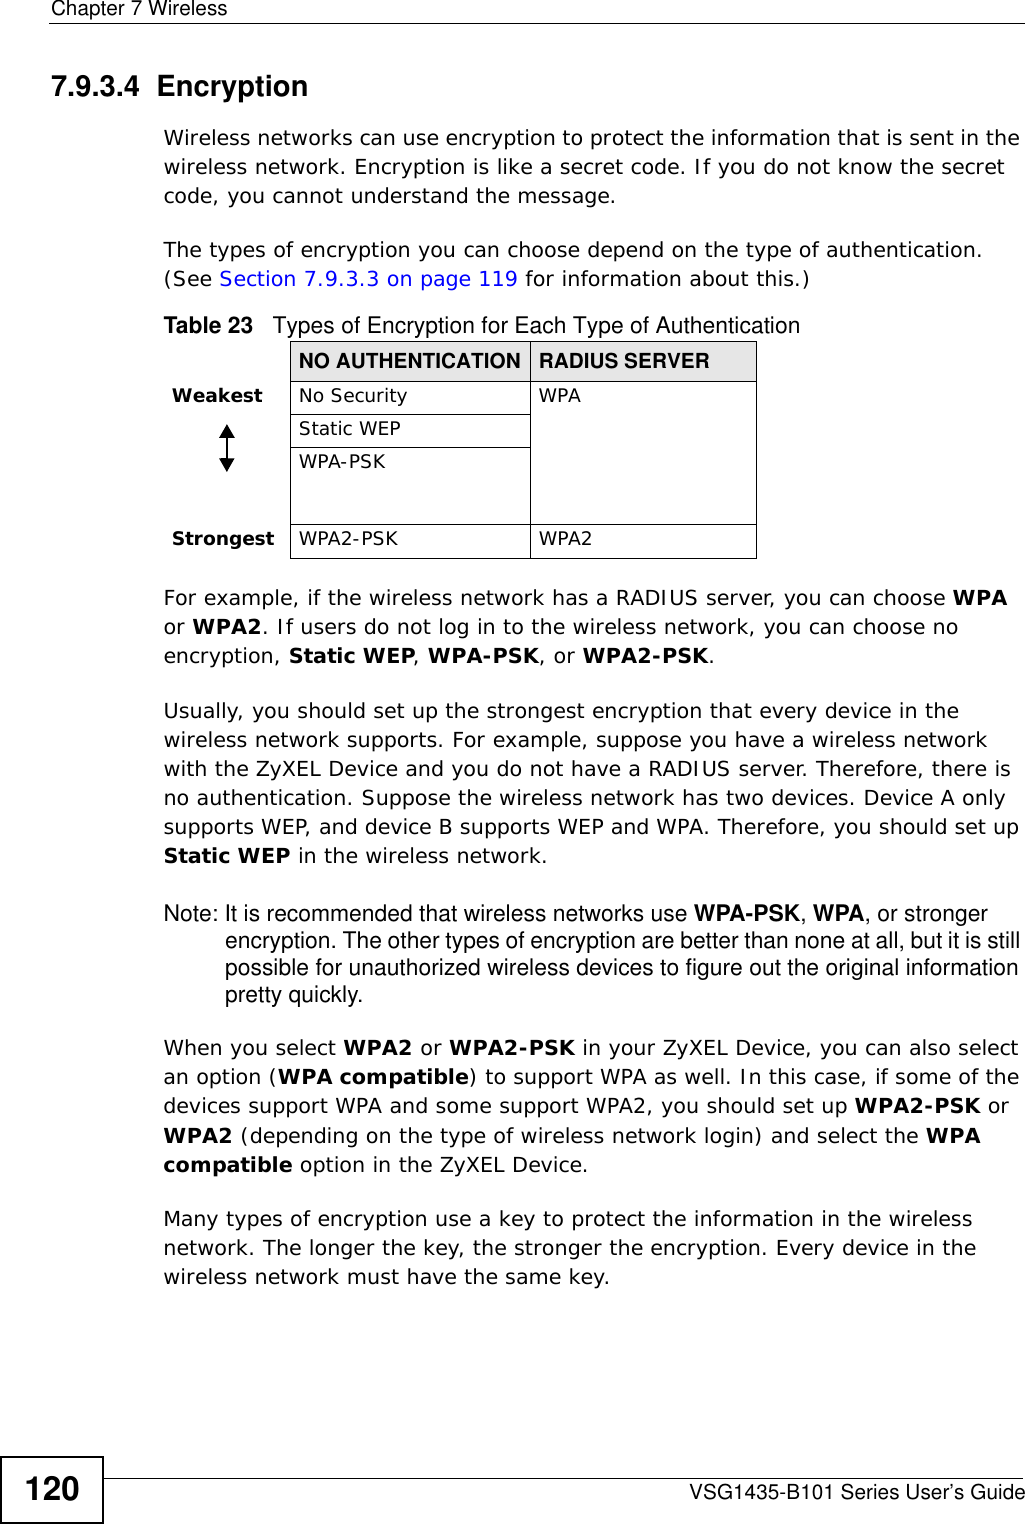 Chapter 7 WirelessVSG1435-B101 Series User’s Guide1207.9.3.4  EncryptionWireless networks can use encryption to protect the information that is sent in the wireless network. Encryption is like a secret code. If you do not know the secret code, you cannot understand the message.The types of encryption you can choose depend on the type of authentication. (See Section 7.9.3.3 on page 119 for information about this.)For example, if the wireless network has a RADIUS server, you can choose WPA or WPA2. If users do not log in to the wireless network, you can choose no encryption, Static WEP, WPA-PSK, or WPA2-PSK.Usually, you should set up the strongest encryption that every device in the wireless network supports. For example, suppose you have a wireless network with the ZyXEL Device and you do not have a RADIUS server. Therefore, there is no authentication. Suppose the wireless network has two devices. Device A only supports WEP, and device B supports WEP and WPA. Therefore, you should set up Static WEP in the wireless network.Note: It is recommended that wireless networks use WPA-PSK, WPA, or stronger encryption. The other types of encryption are better than none at all, but it is still possible for unauthorized wireless devices to figure out the original information pretty quickly.When you select WPA2 or WPA2-PSK in your ZyXEL Device, you can also select an option (WPA compatible) to support WPA as well. In this case, if some of the devices support WPA and some support WPA2, you should set up WPA2-PSK or WPA2 (depending on the type of wireless network login) and select the WPA compatible option in the ZyXEL Device.Many types of encryption use a key to protect the information in the wireless network. The longer the key, the stronger the encryption. Every device in the wireless network must have the same key.Table 23   Types of Encryption for Each Type of AuthenticationNO AUTHENTICATION RADIUS SERVERWeakest No Security WPAStatic WEPWPA-PSKStrongest WPA2-PSK WPA2